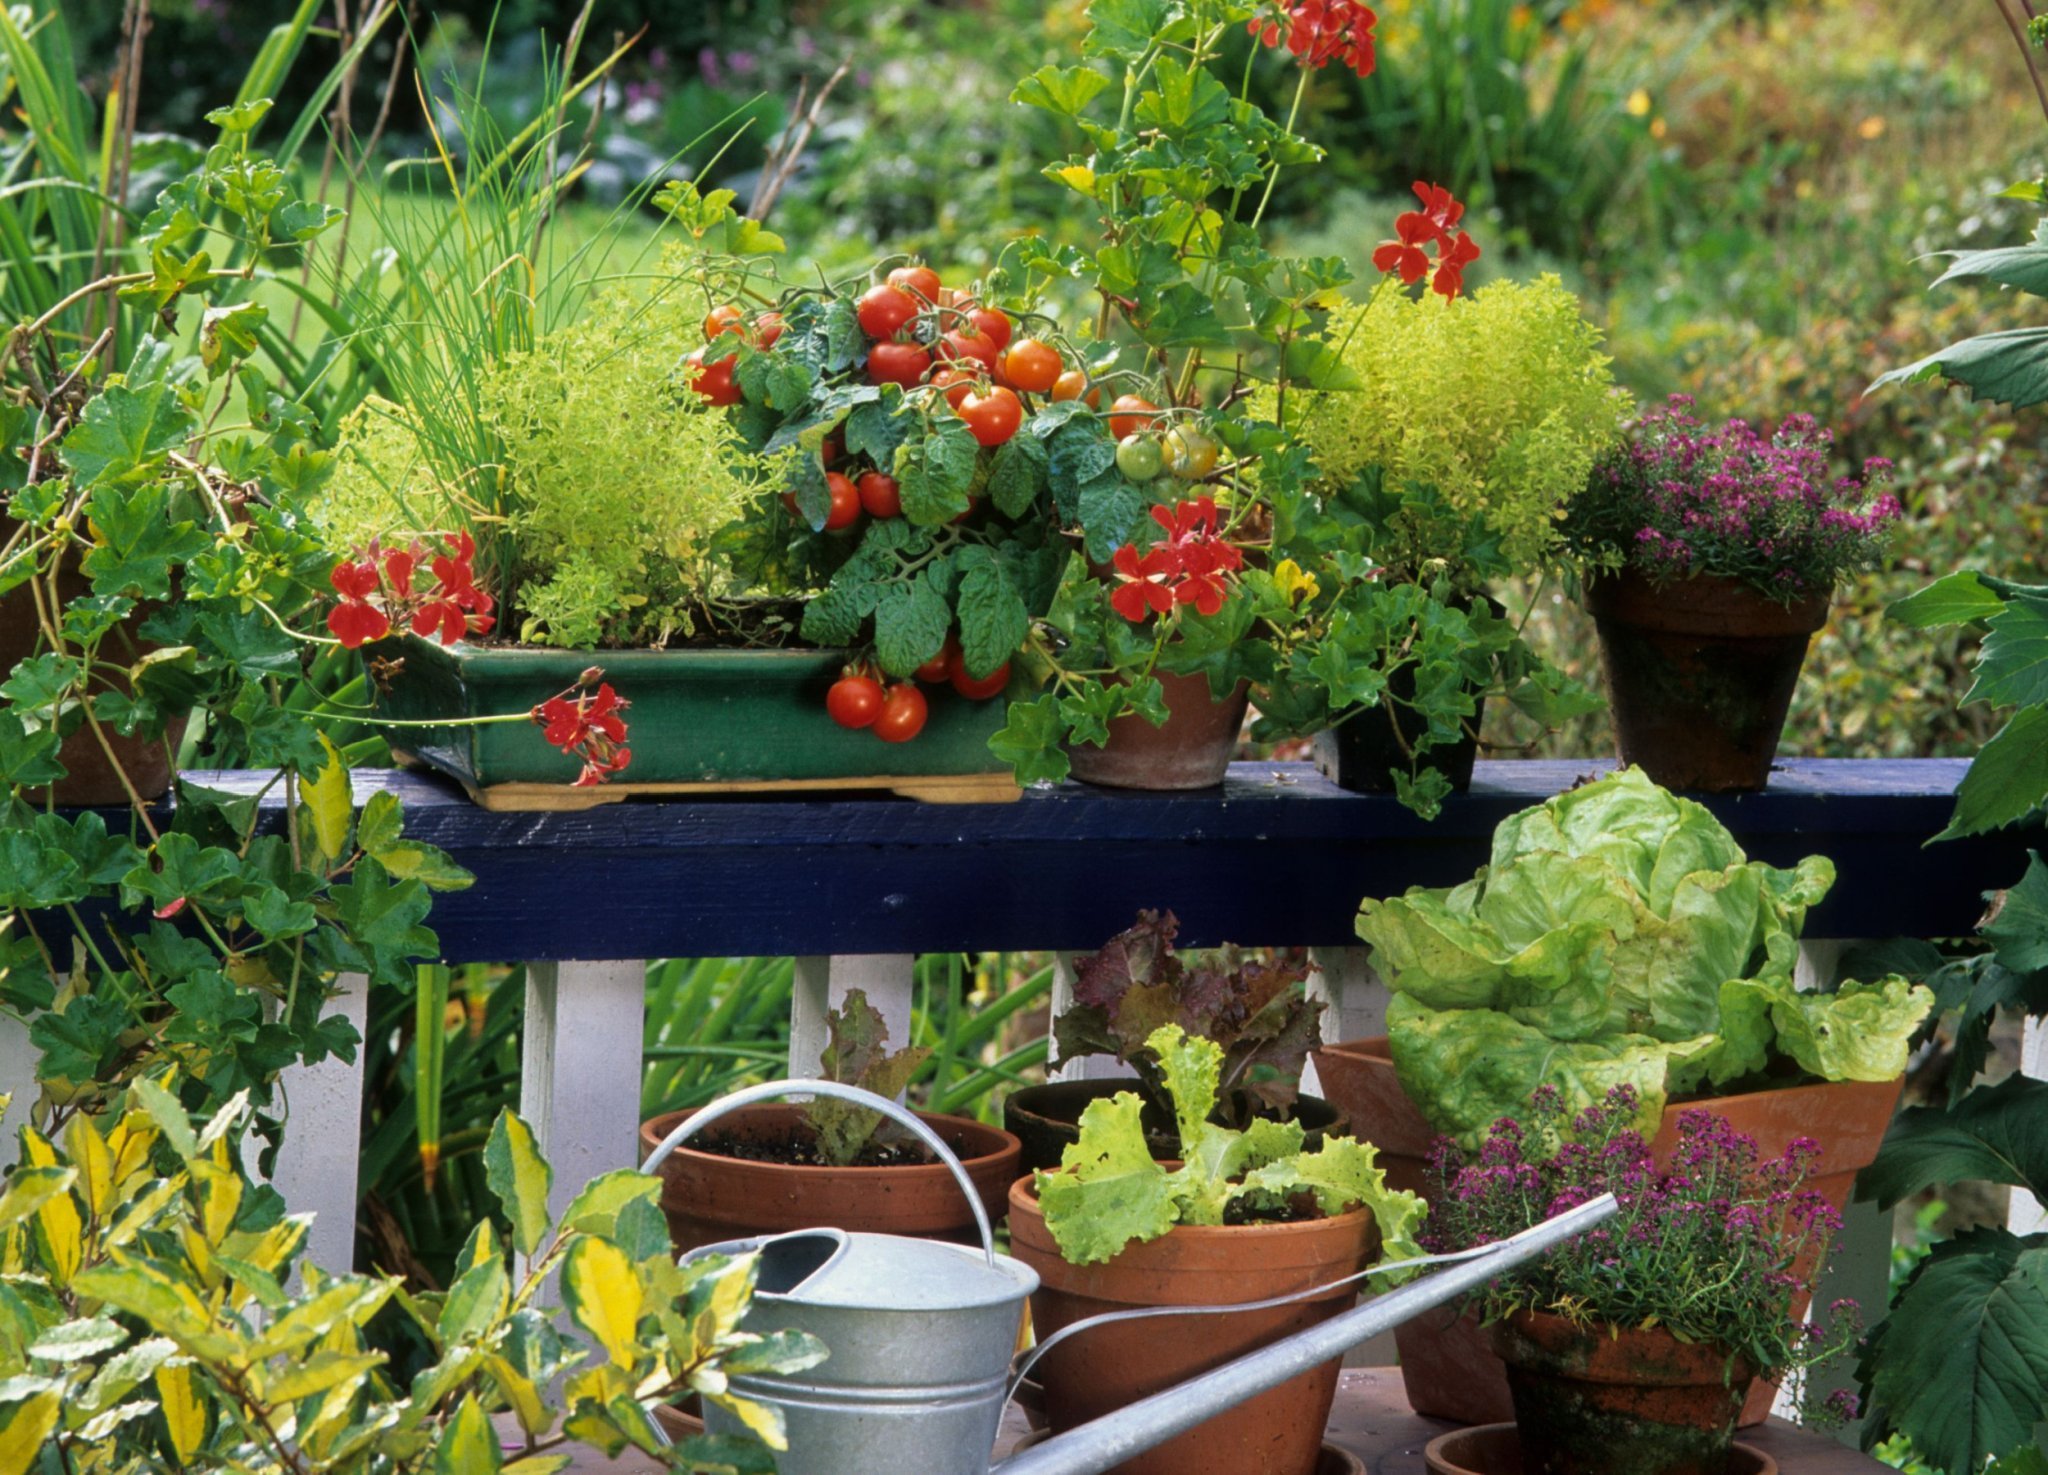 6 BEST VEGETABLES YOU CAN GROW IN CONTAINERS